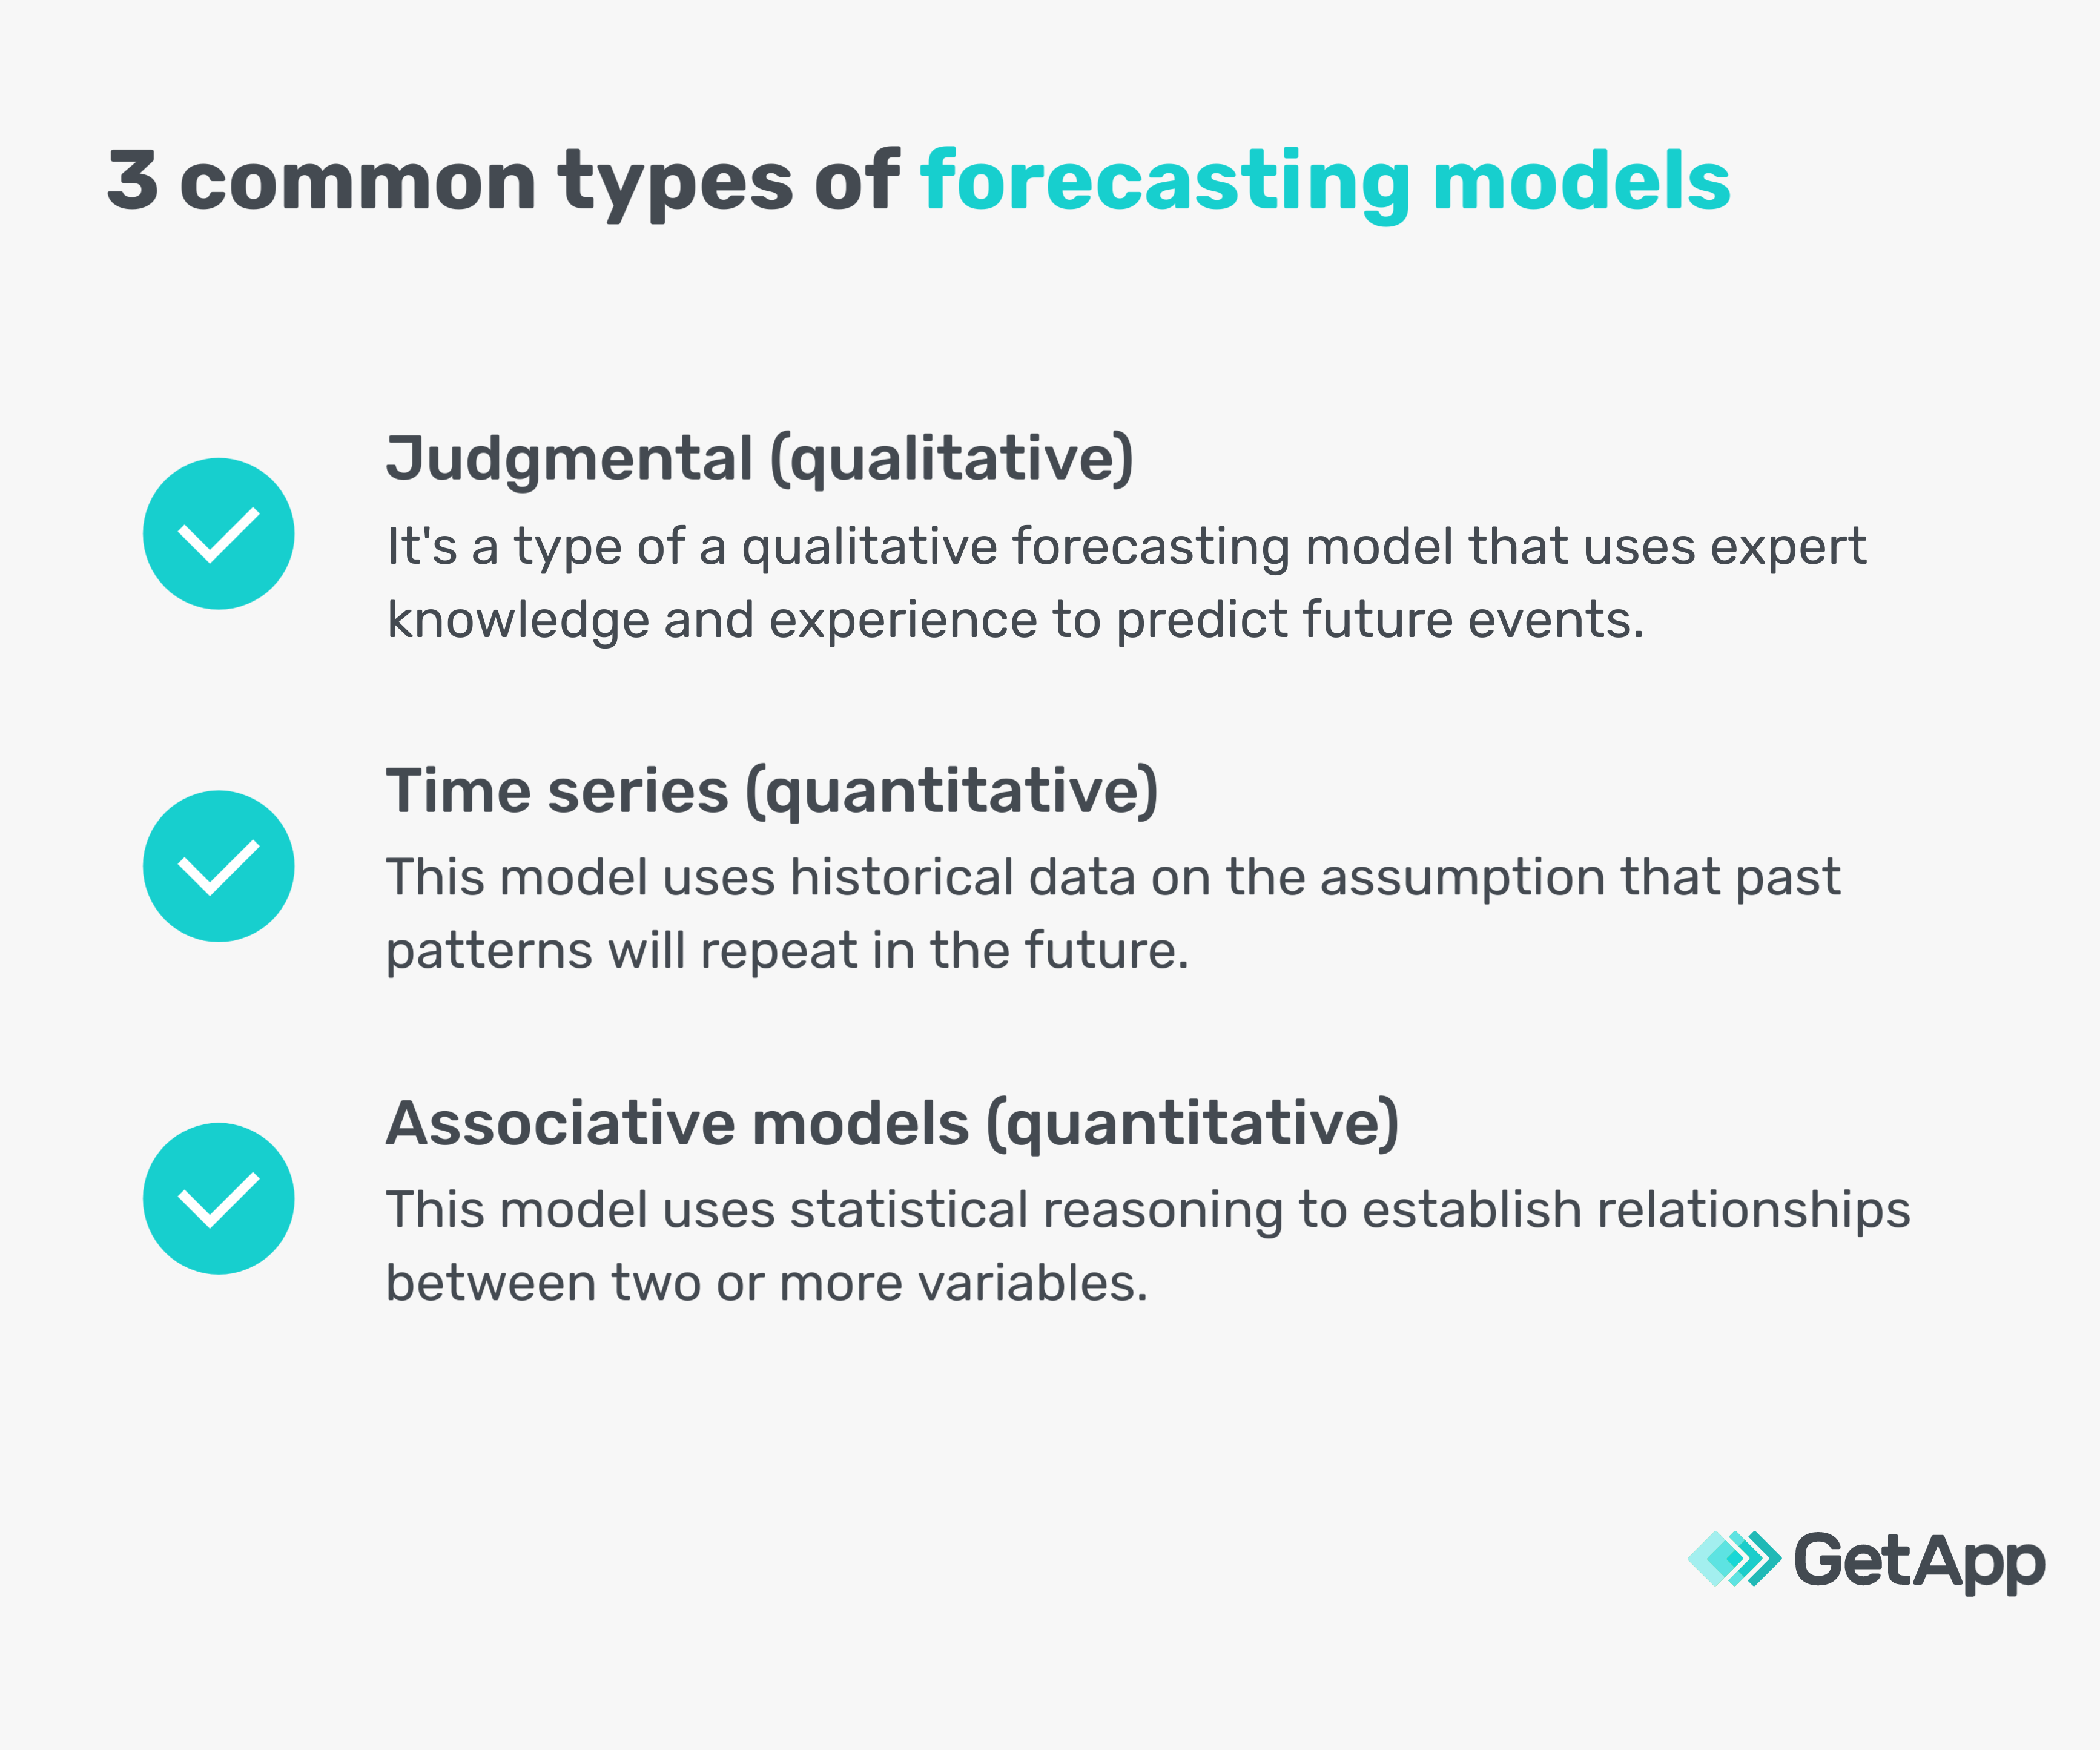 3 common types of forecasting models